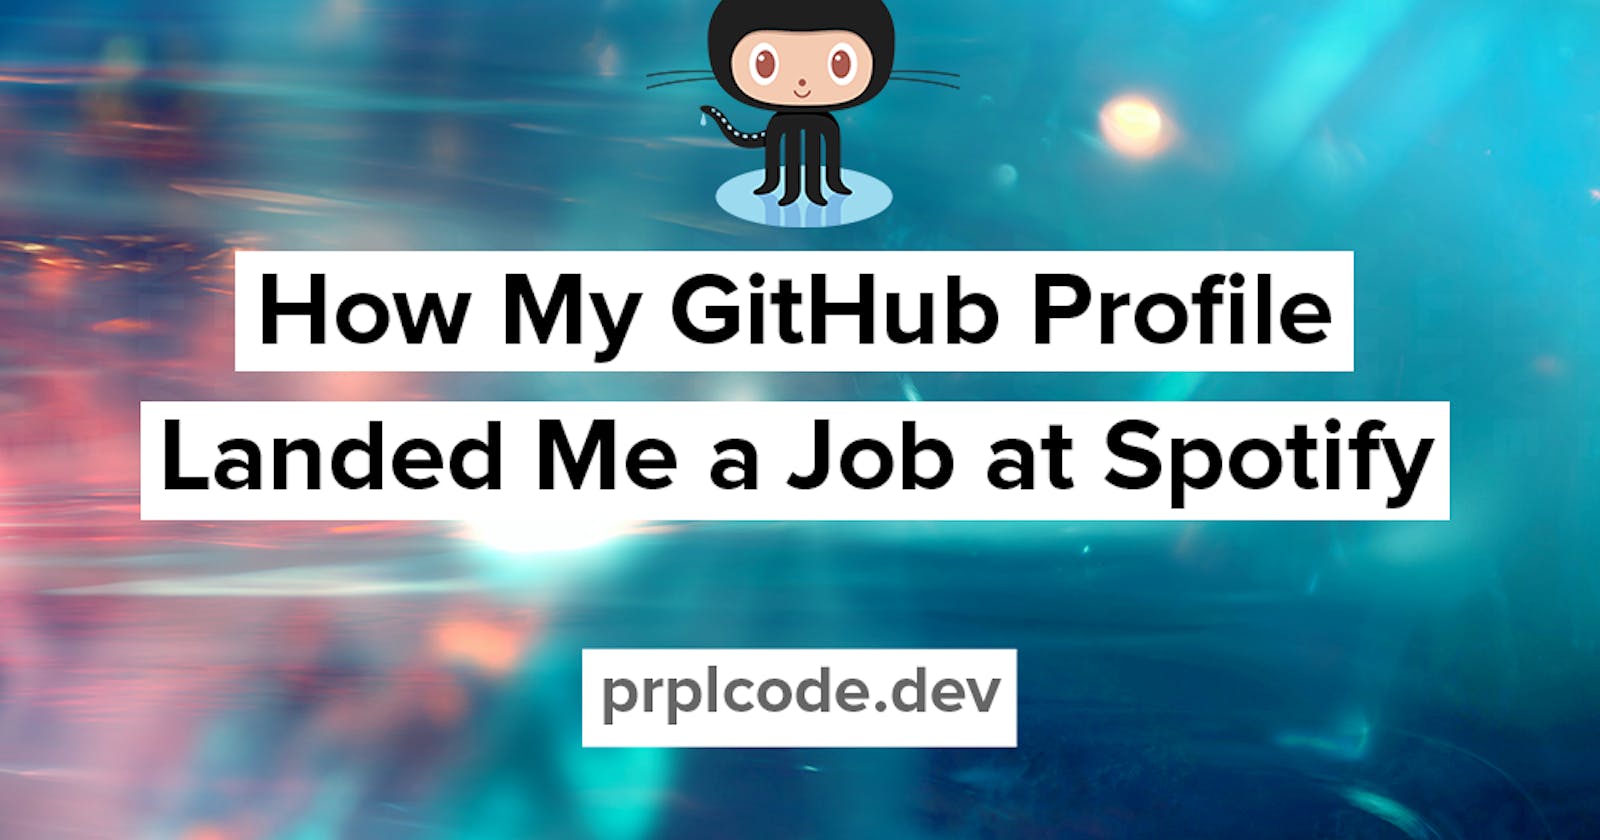 How My GitHub Profile Landed Me a Job at Spotify